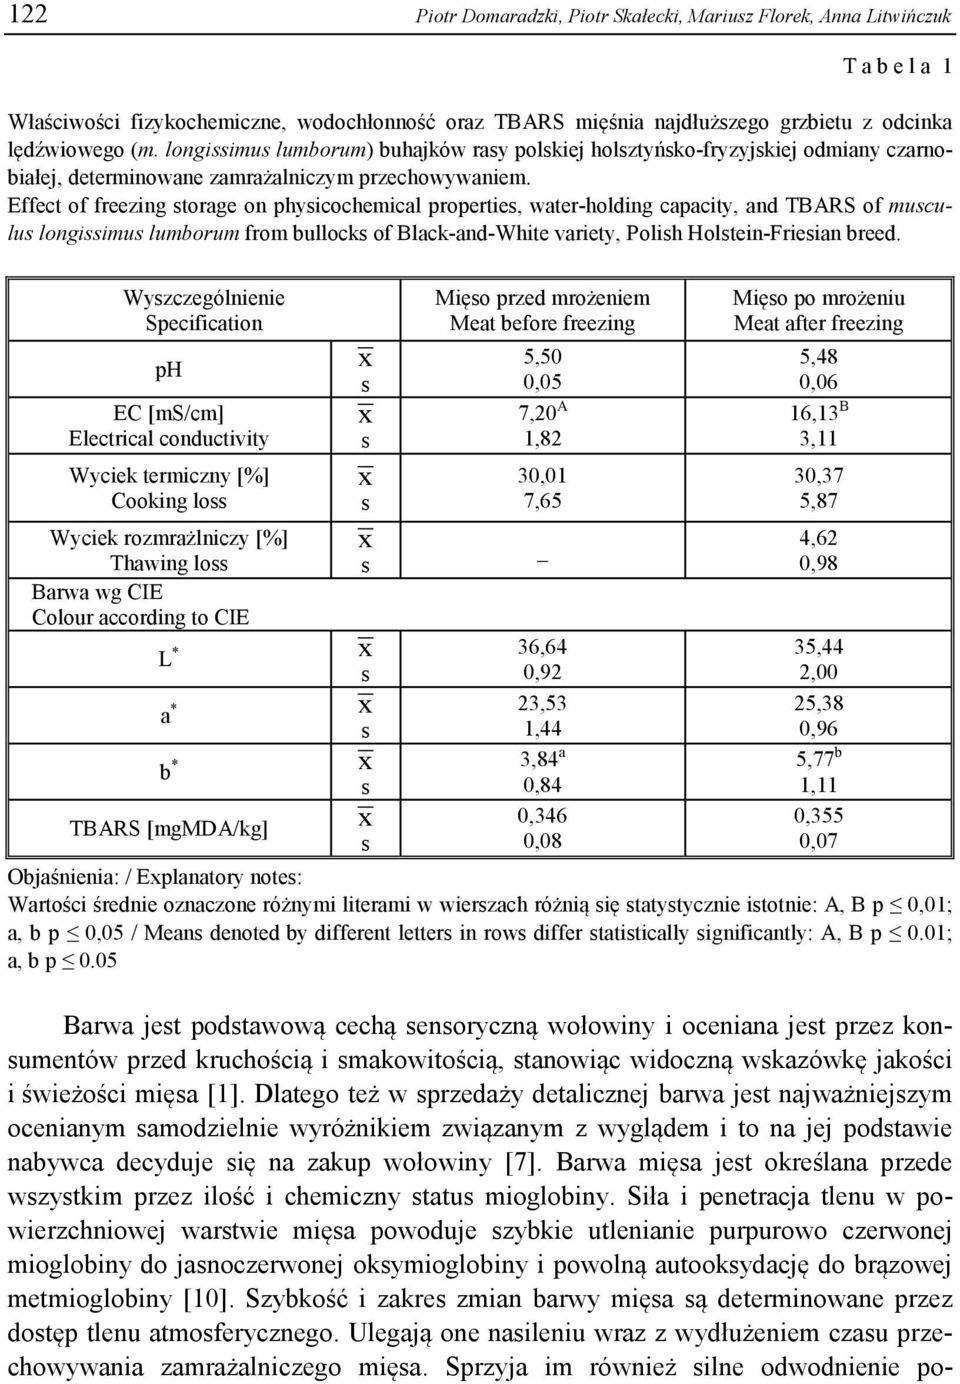 Effect of freezing torage on phyicochemical propertie, water-holding capacity, and TBARS of muculu longiimu lumborum from bullock of Black-and-White variety, Polih Holtein-Frieian breed.